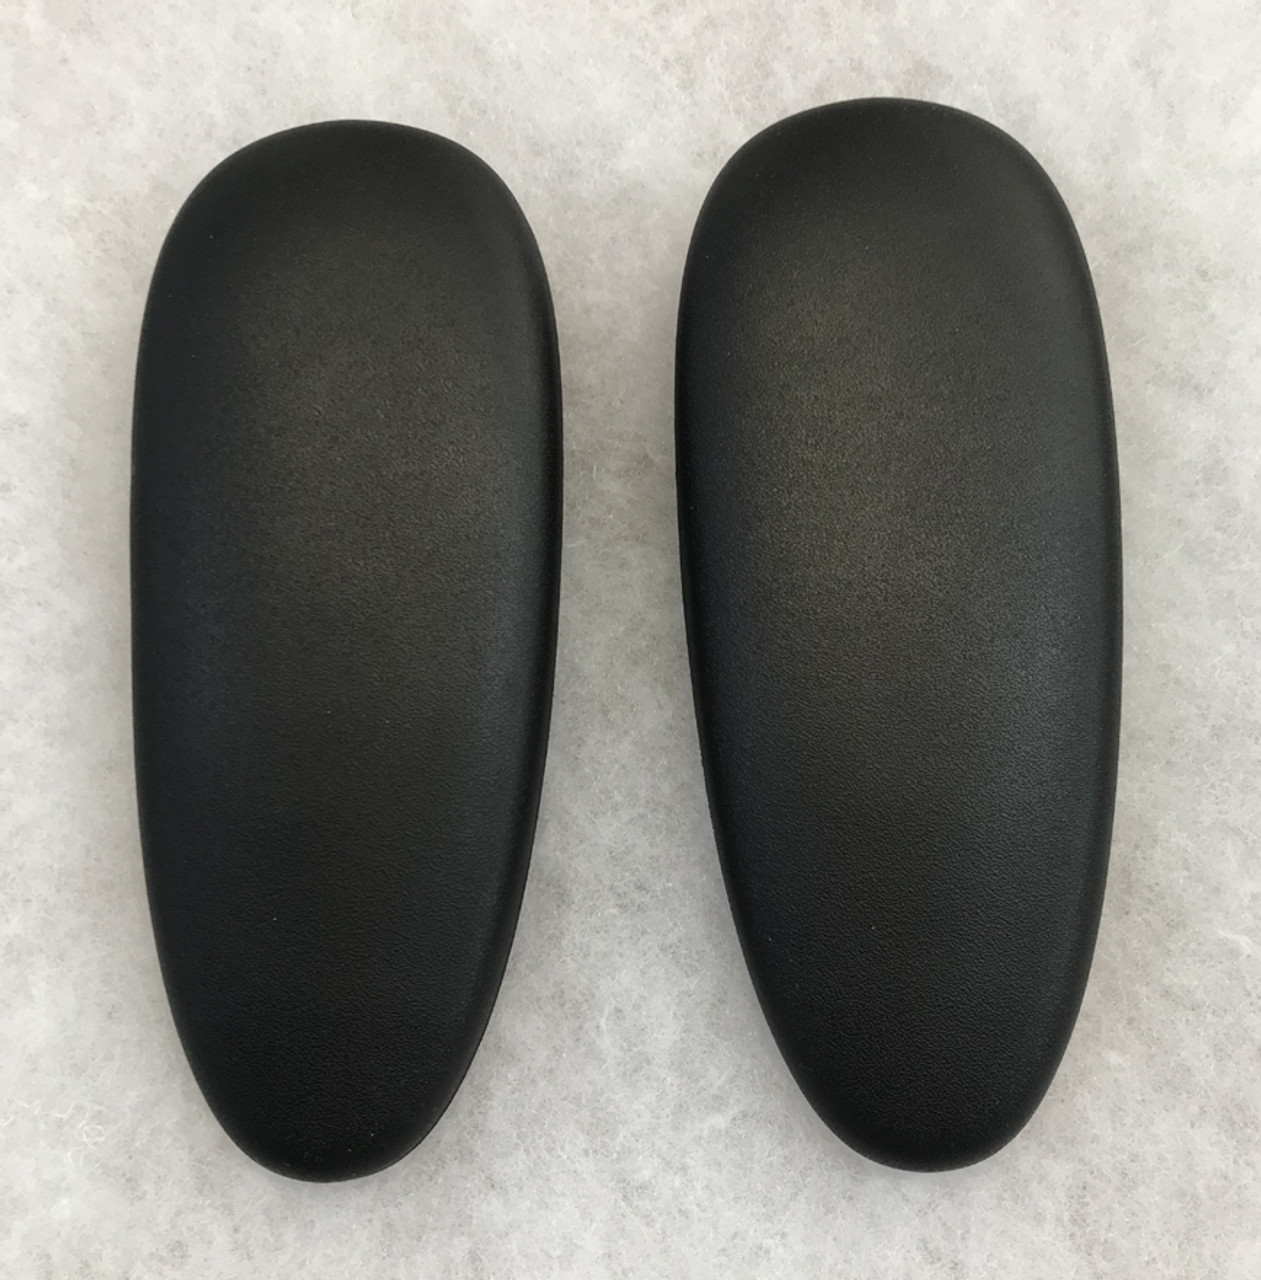 RH Logic 8S Arm Pads from The Chair Clinic Ltd